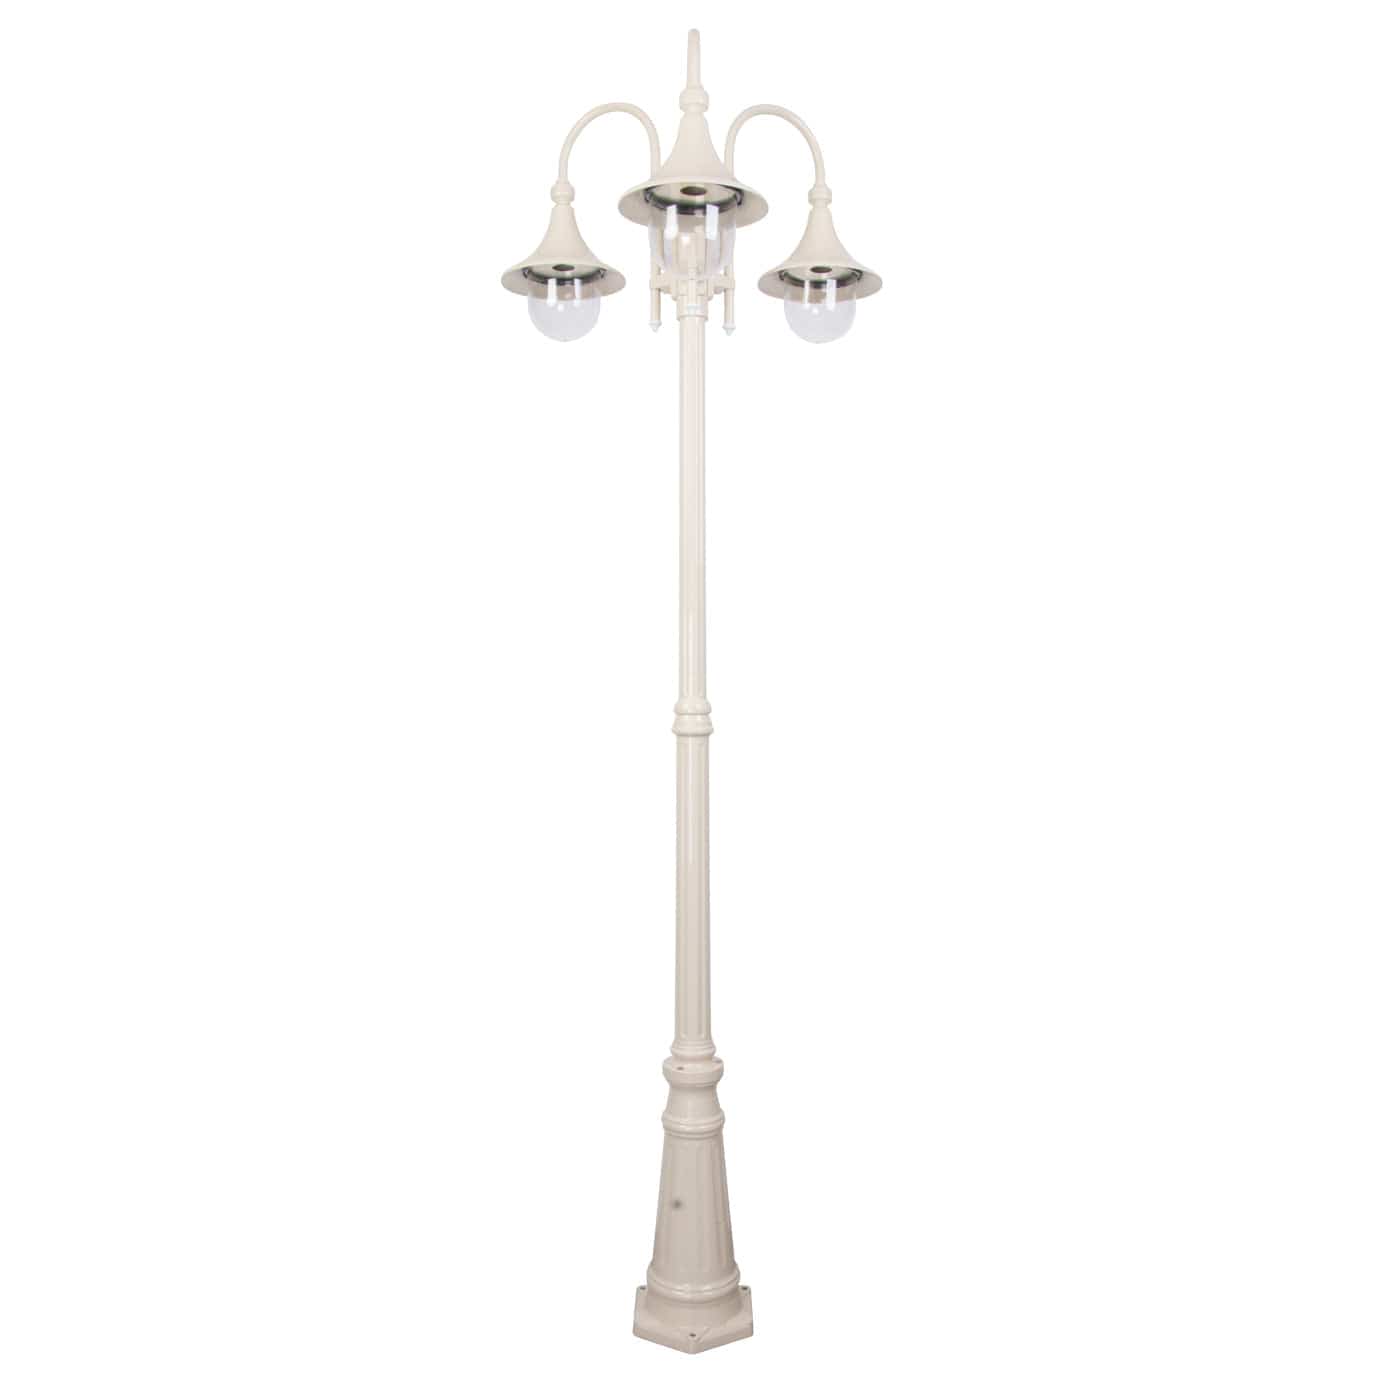 Domus Lighting Exterior Posts Beige Domus GT-664 Monaco Triple Head Tall Post Lights-For-You 15854